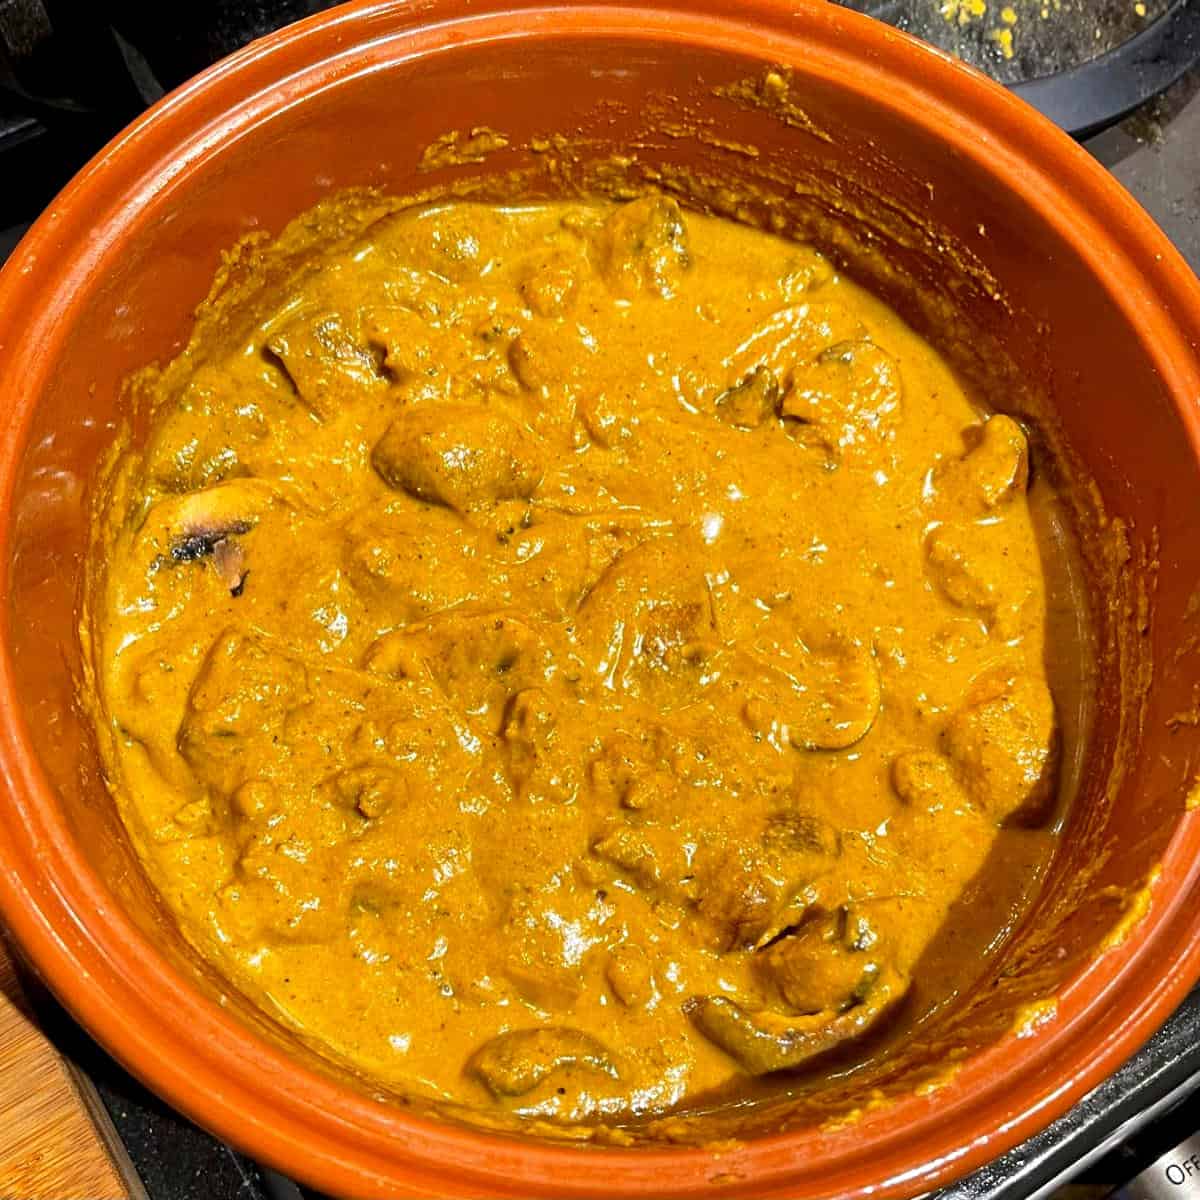 Mushrooms and seitan mixed with sauce in seitan curry.